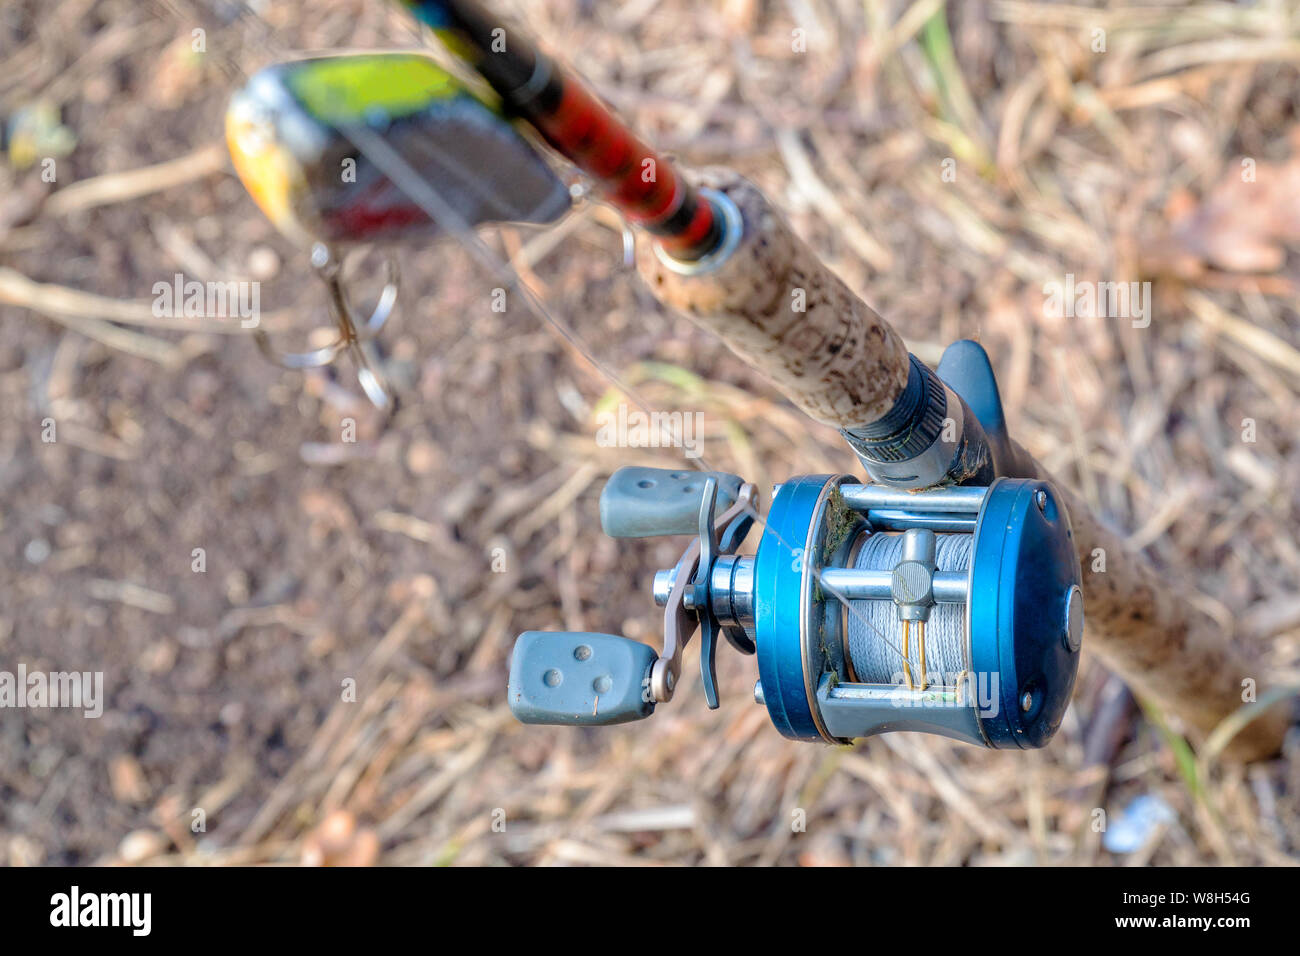 Spinning rod with baitcasting reel and bait Stock Photo - Alamy